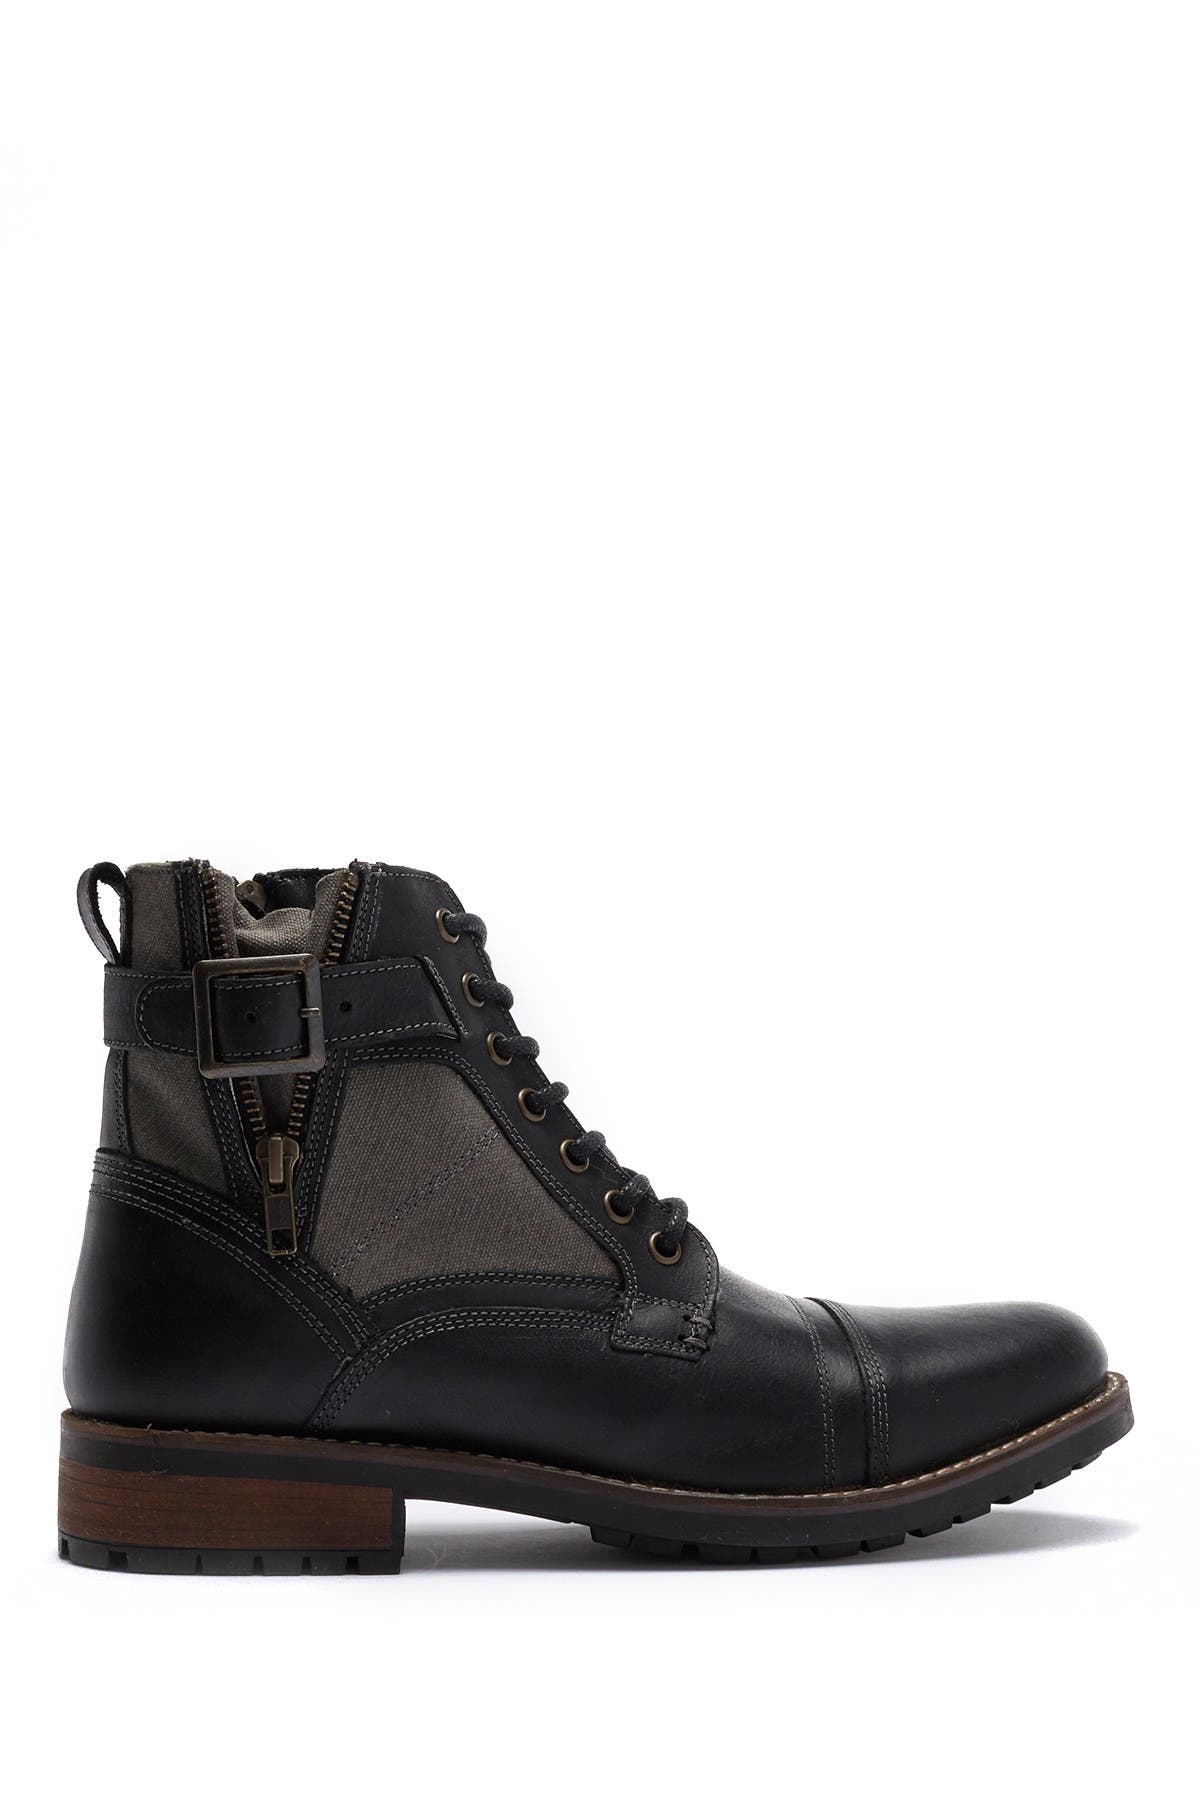 steve madden lace up heel boots